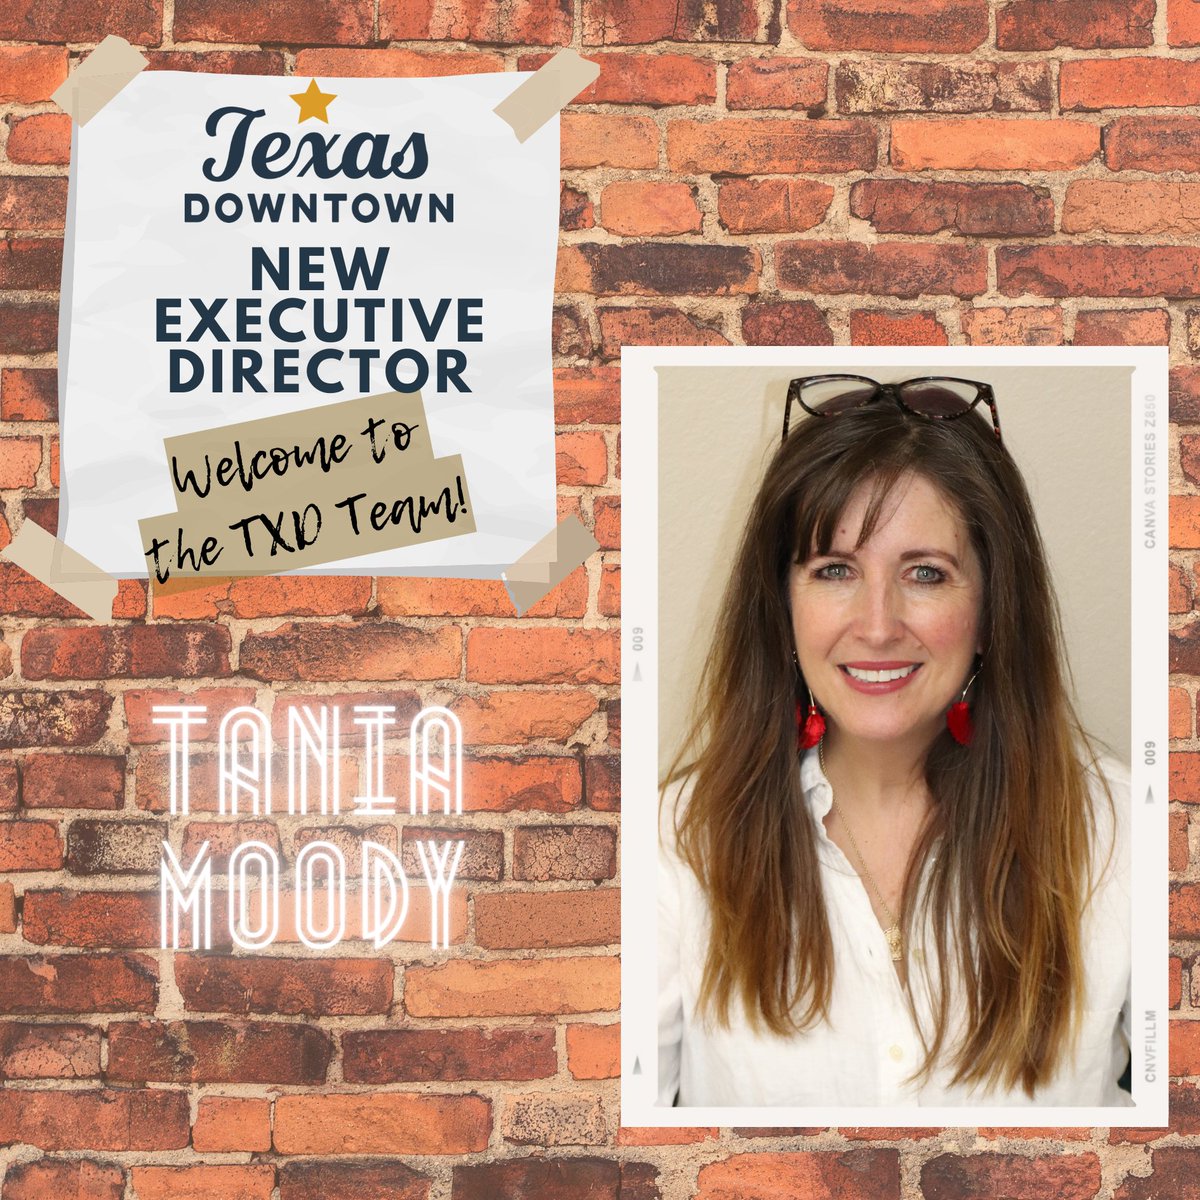 Please join us in welcoming Tania Moody as @TexasDowntown 's new executive director! Tania hails from the City of Mosaics, Levelland, Texas, where she has been serving as its Main Street manager for the past three years.  Her official start date will be Monday, May 20. #TXD